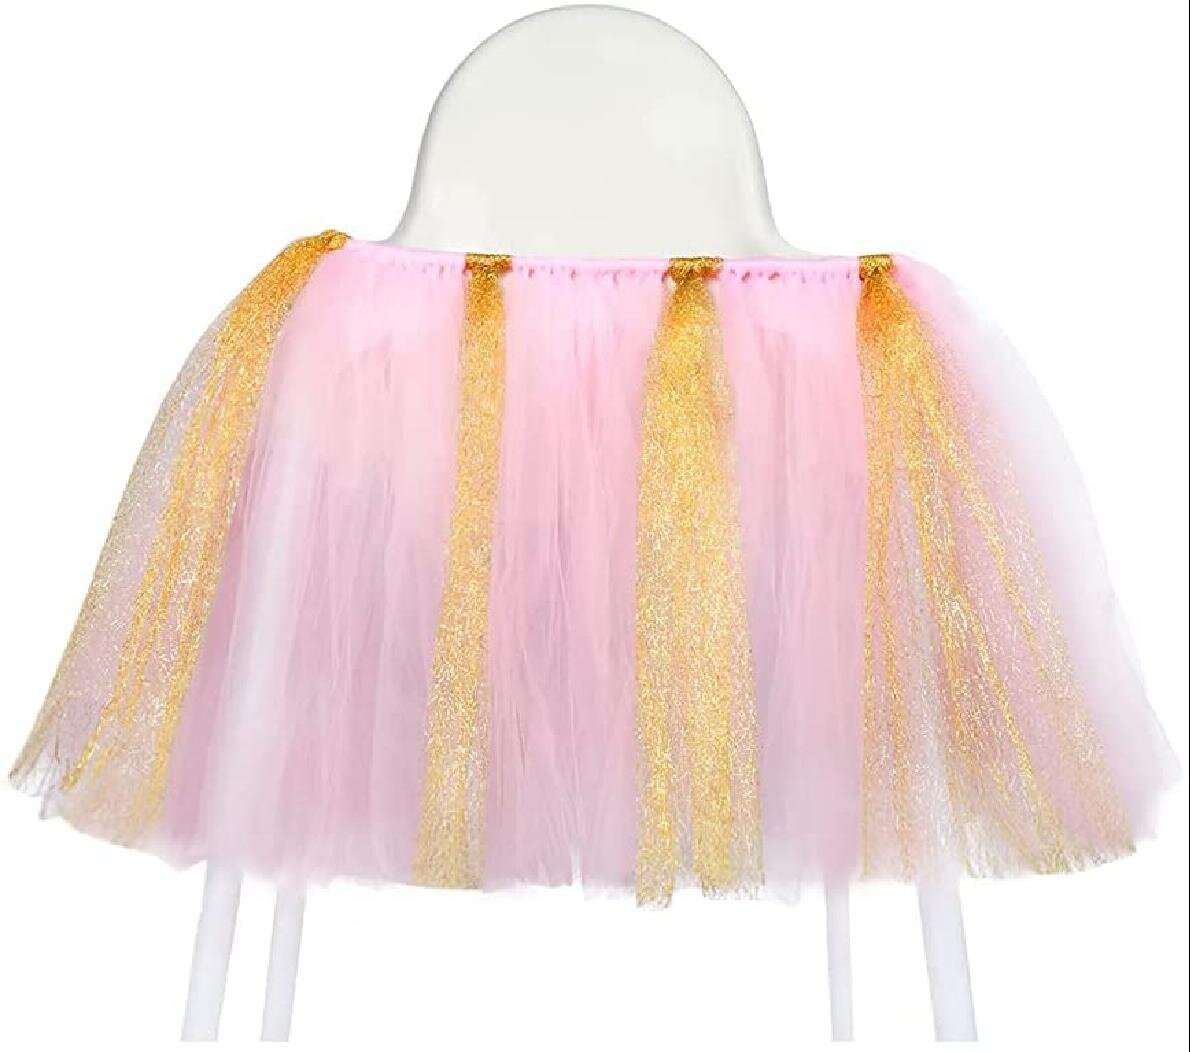 Tutu baby high chair Cloth Skirt tulleTableware Years old Birthday Party Favor 